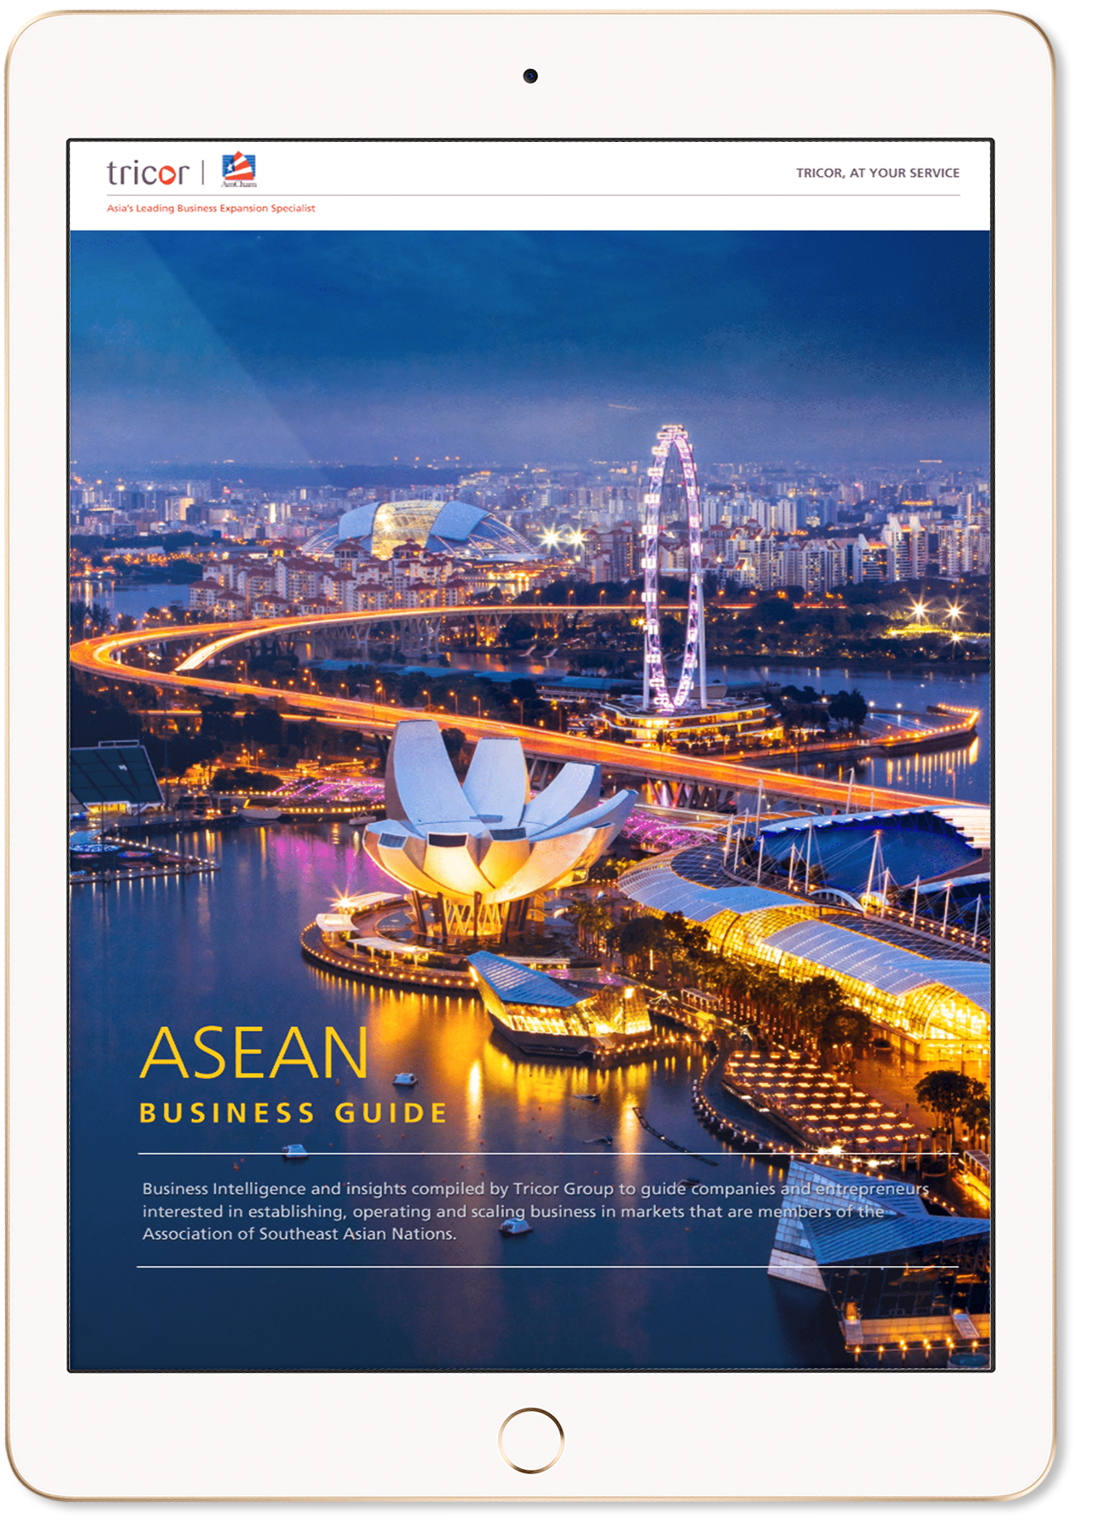 Doing business in ASEAN